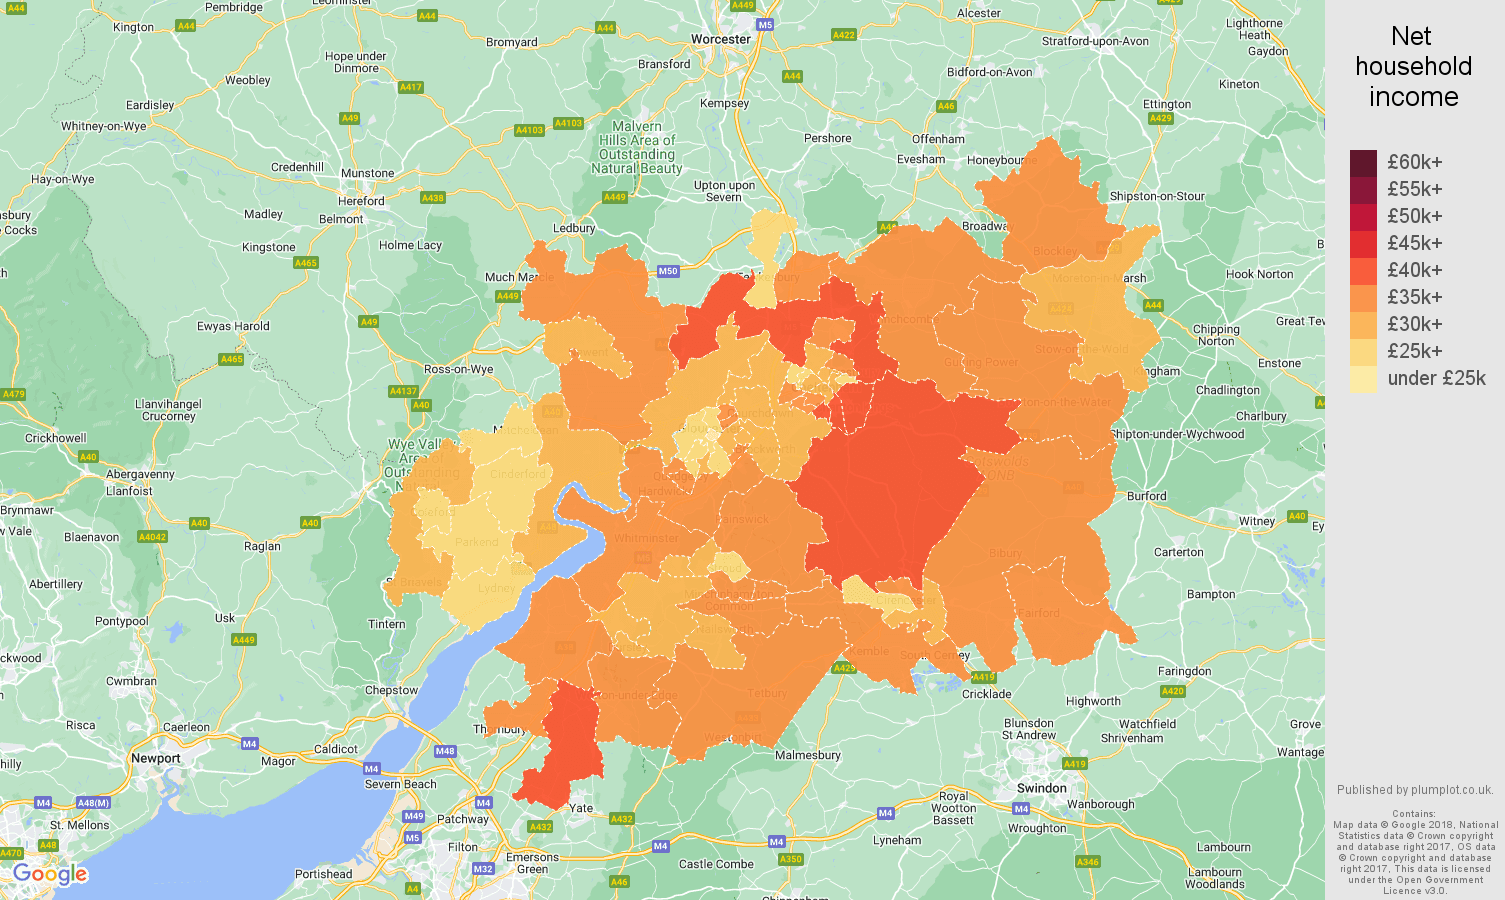 Gloucester net household income map